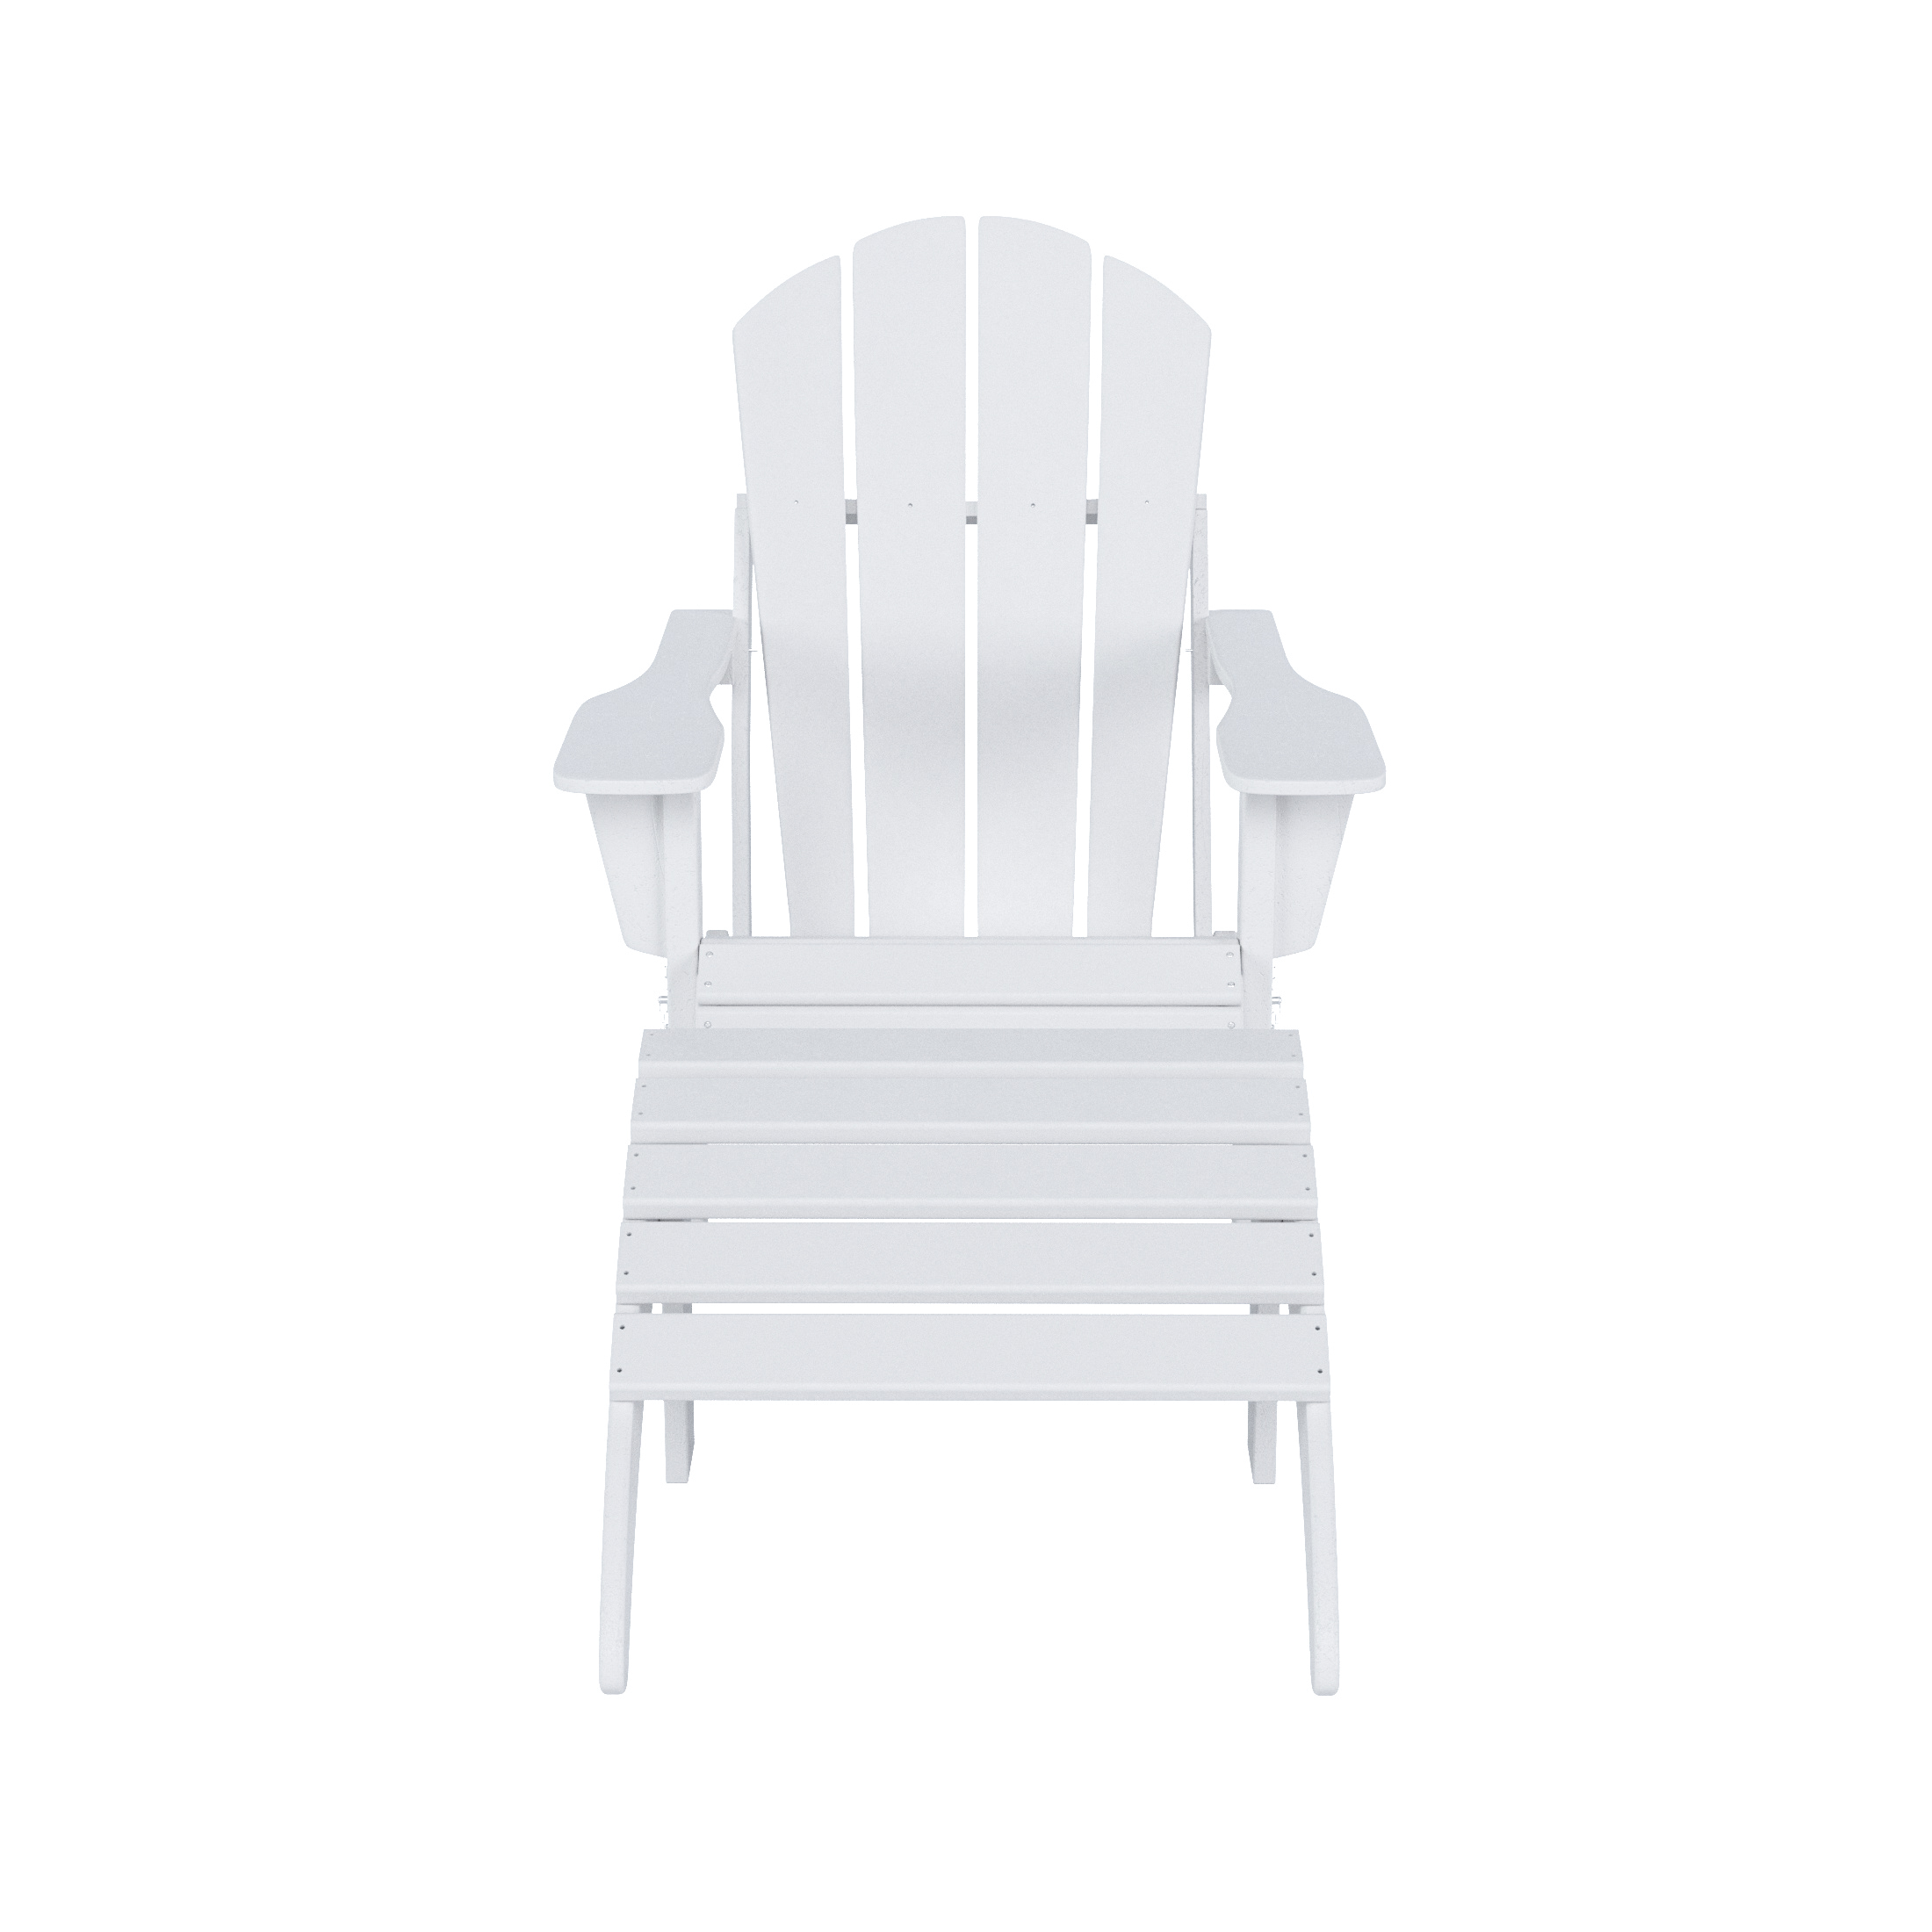 WestinTrends Malibu Outdoor Lounge Chair, 2-Pieces Adirondack Chair Set with Ottoman, All Weather Poly Lumber Patio Lawn Folding Chairs for Outside Pool Garden Backyard Beach, White - image 3 of 6